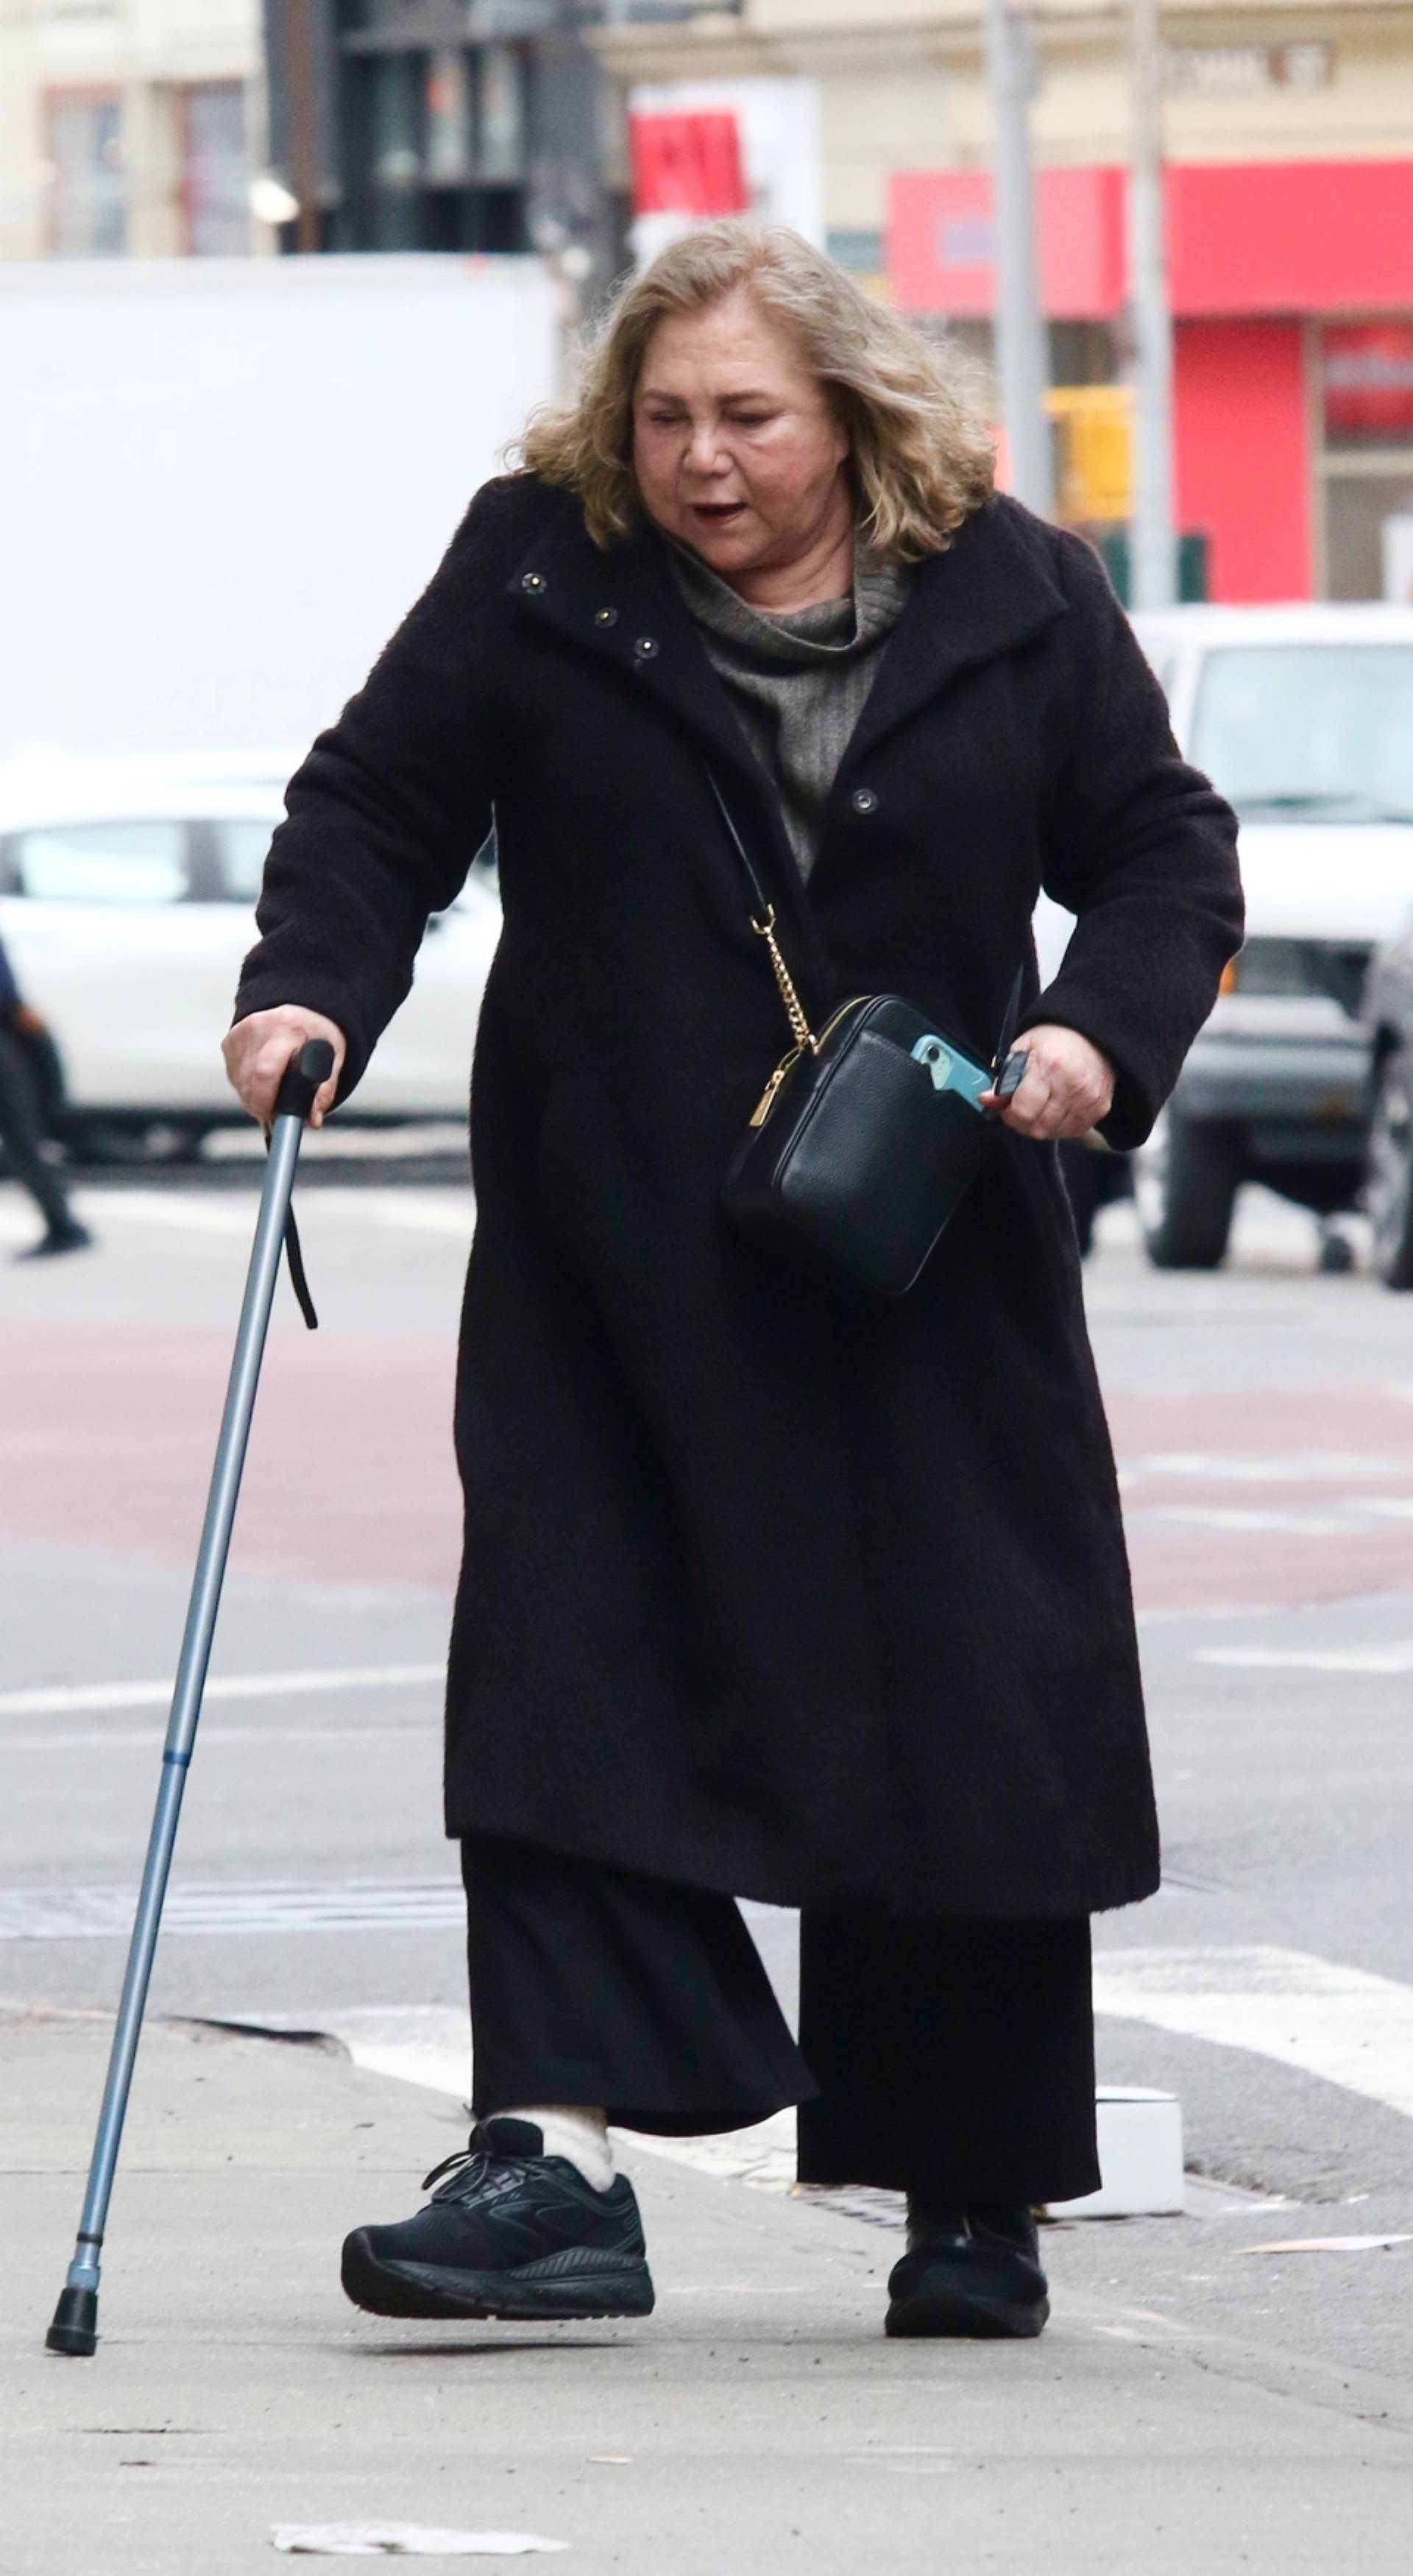 *PREMIUM-EXCLUSIVE* Kathleen Turner looks unrecognizable as she struggles in pain to walk with a cane during a rare public outing **WEB EMBARGO UNTIL APRIL 9, 2024 UNTIL 2:00 PM ET**